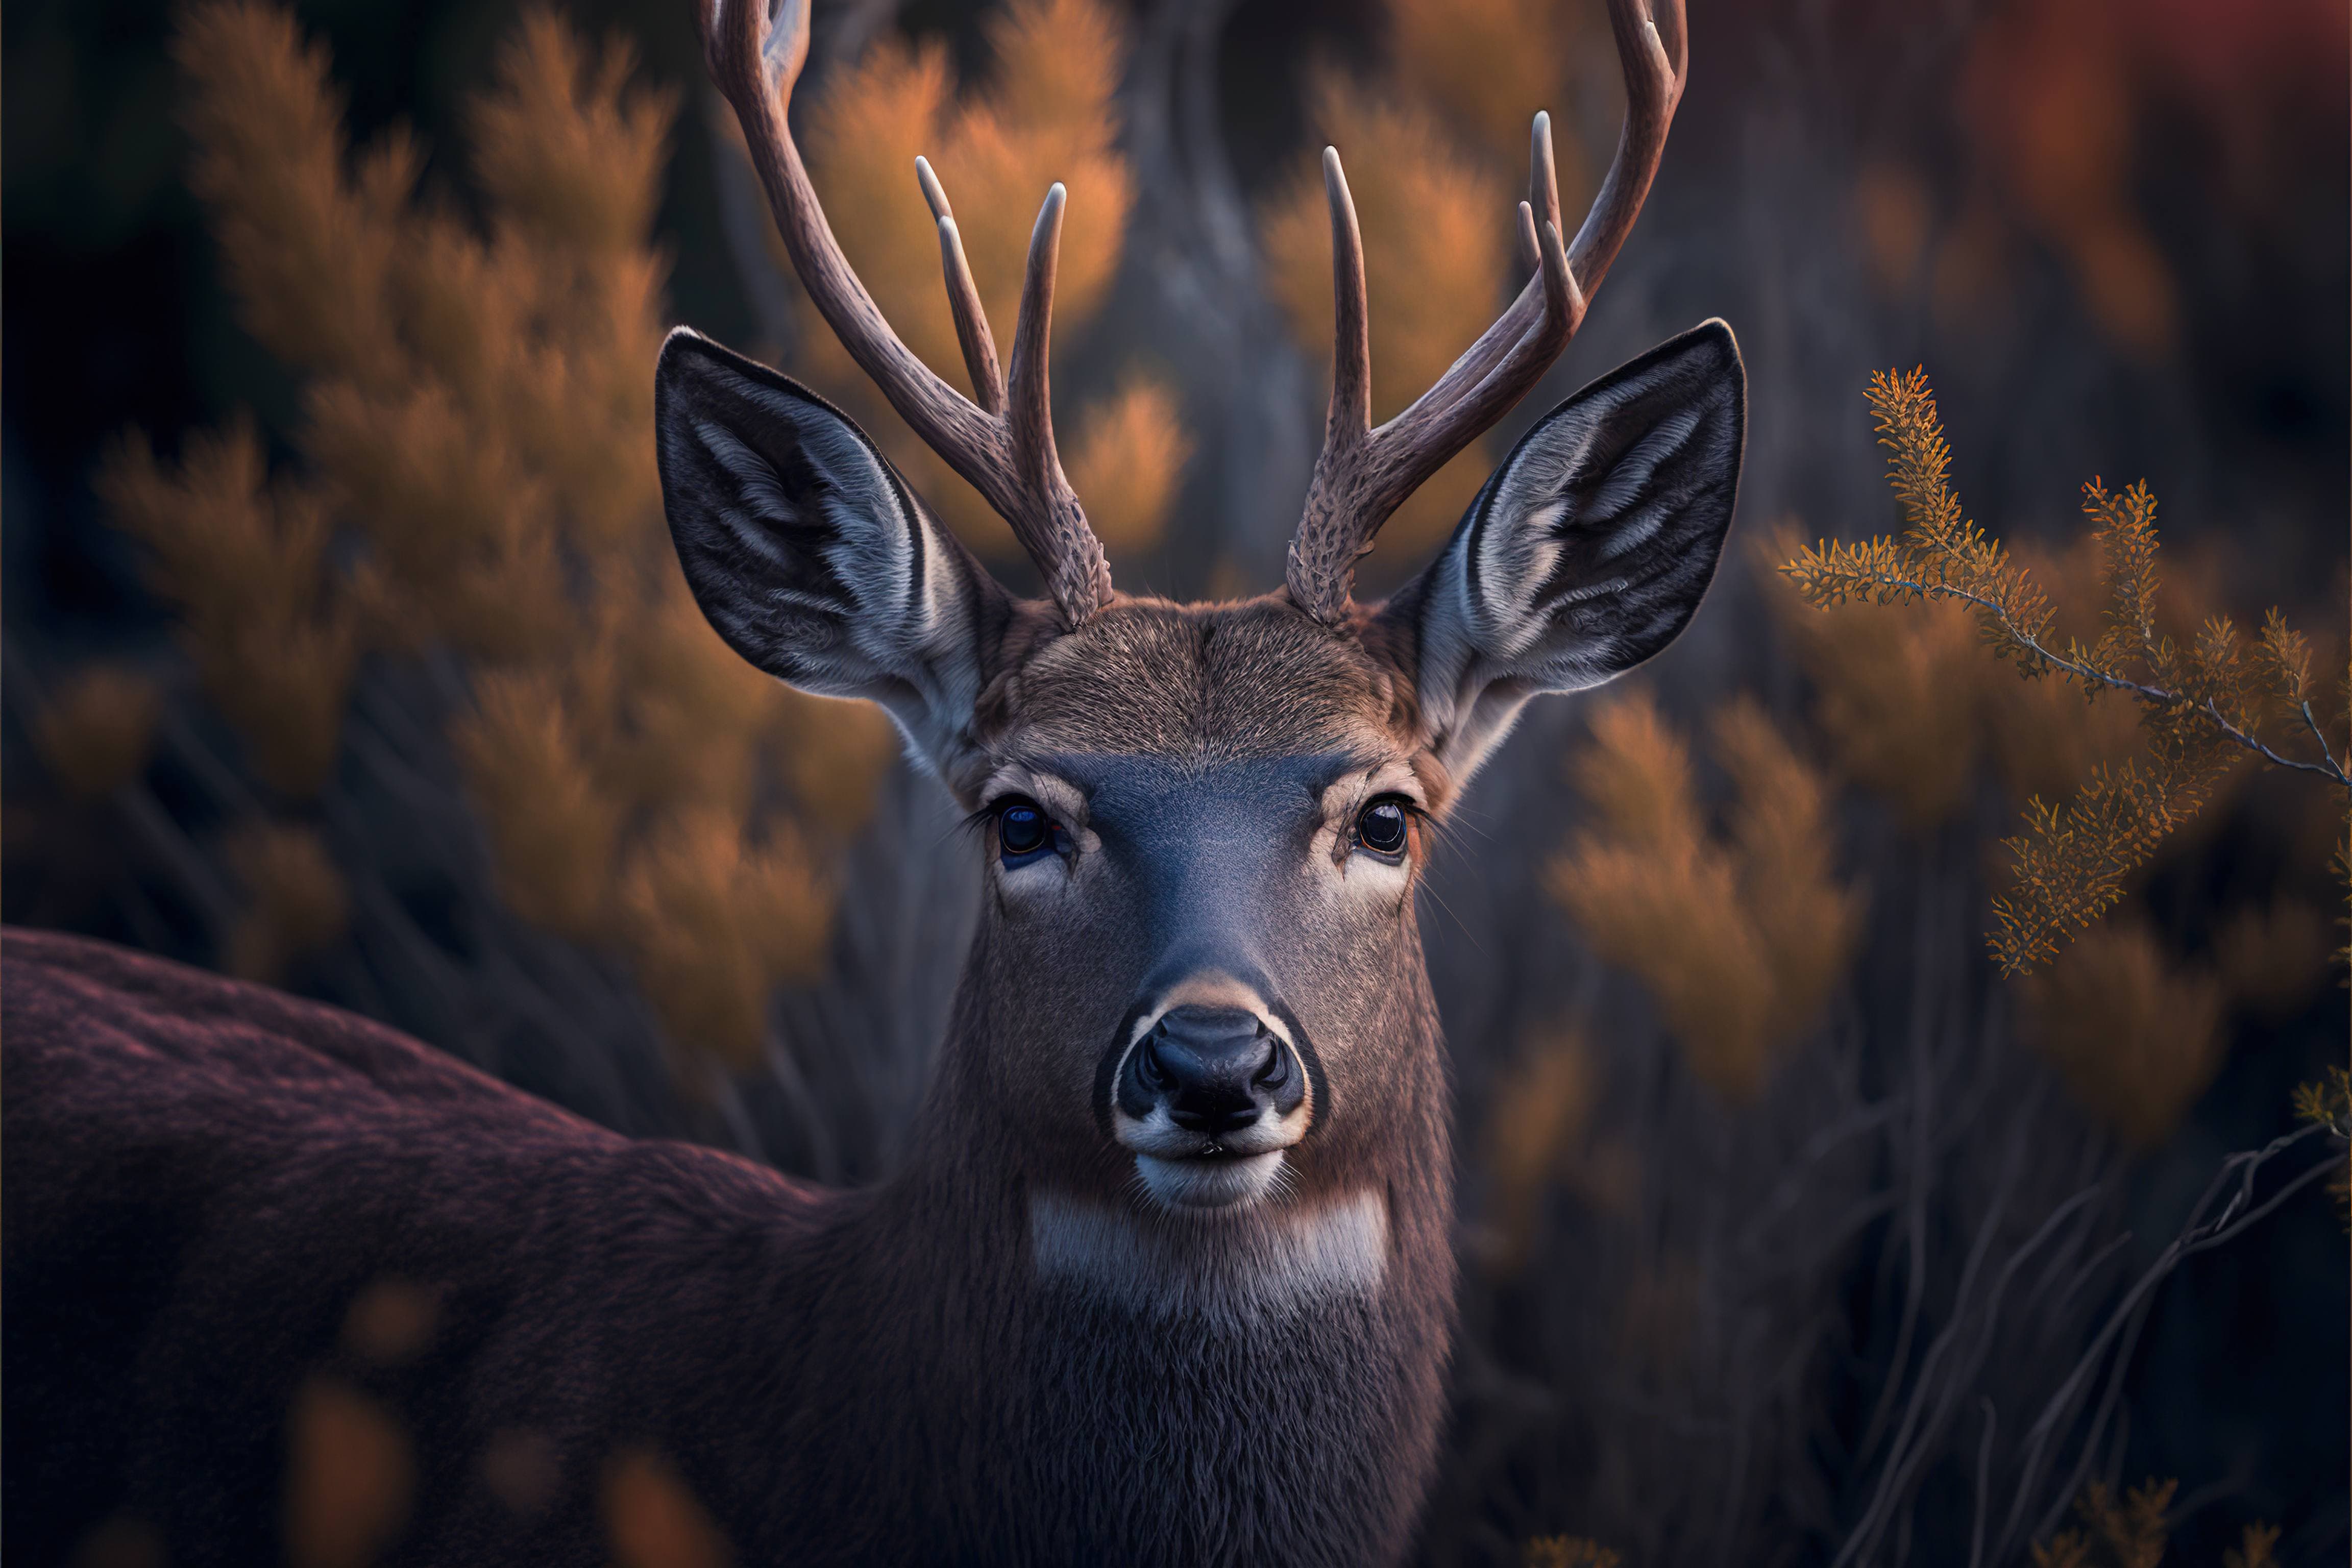 A deer with big antlers in the forest - Deer